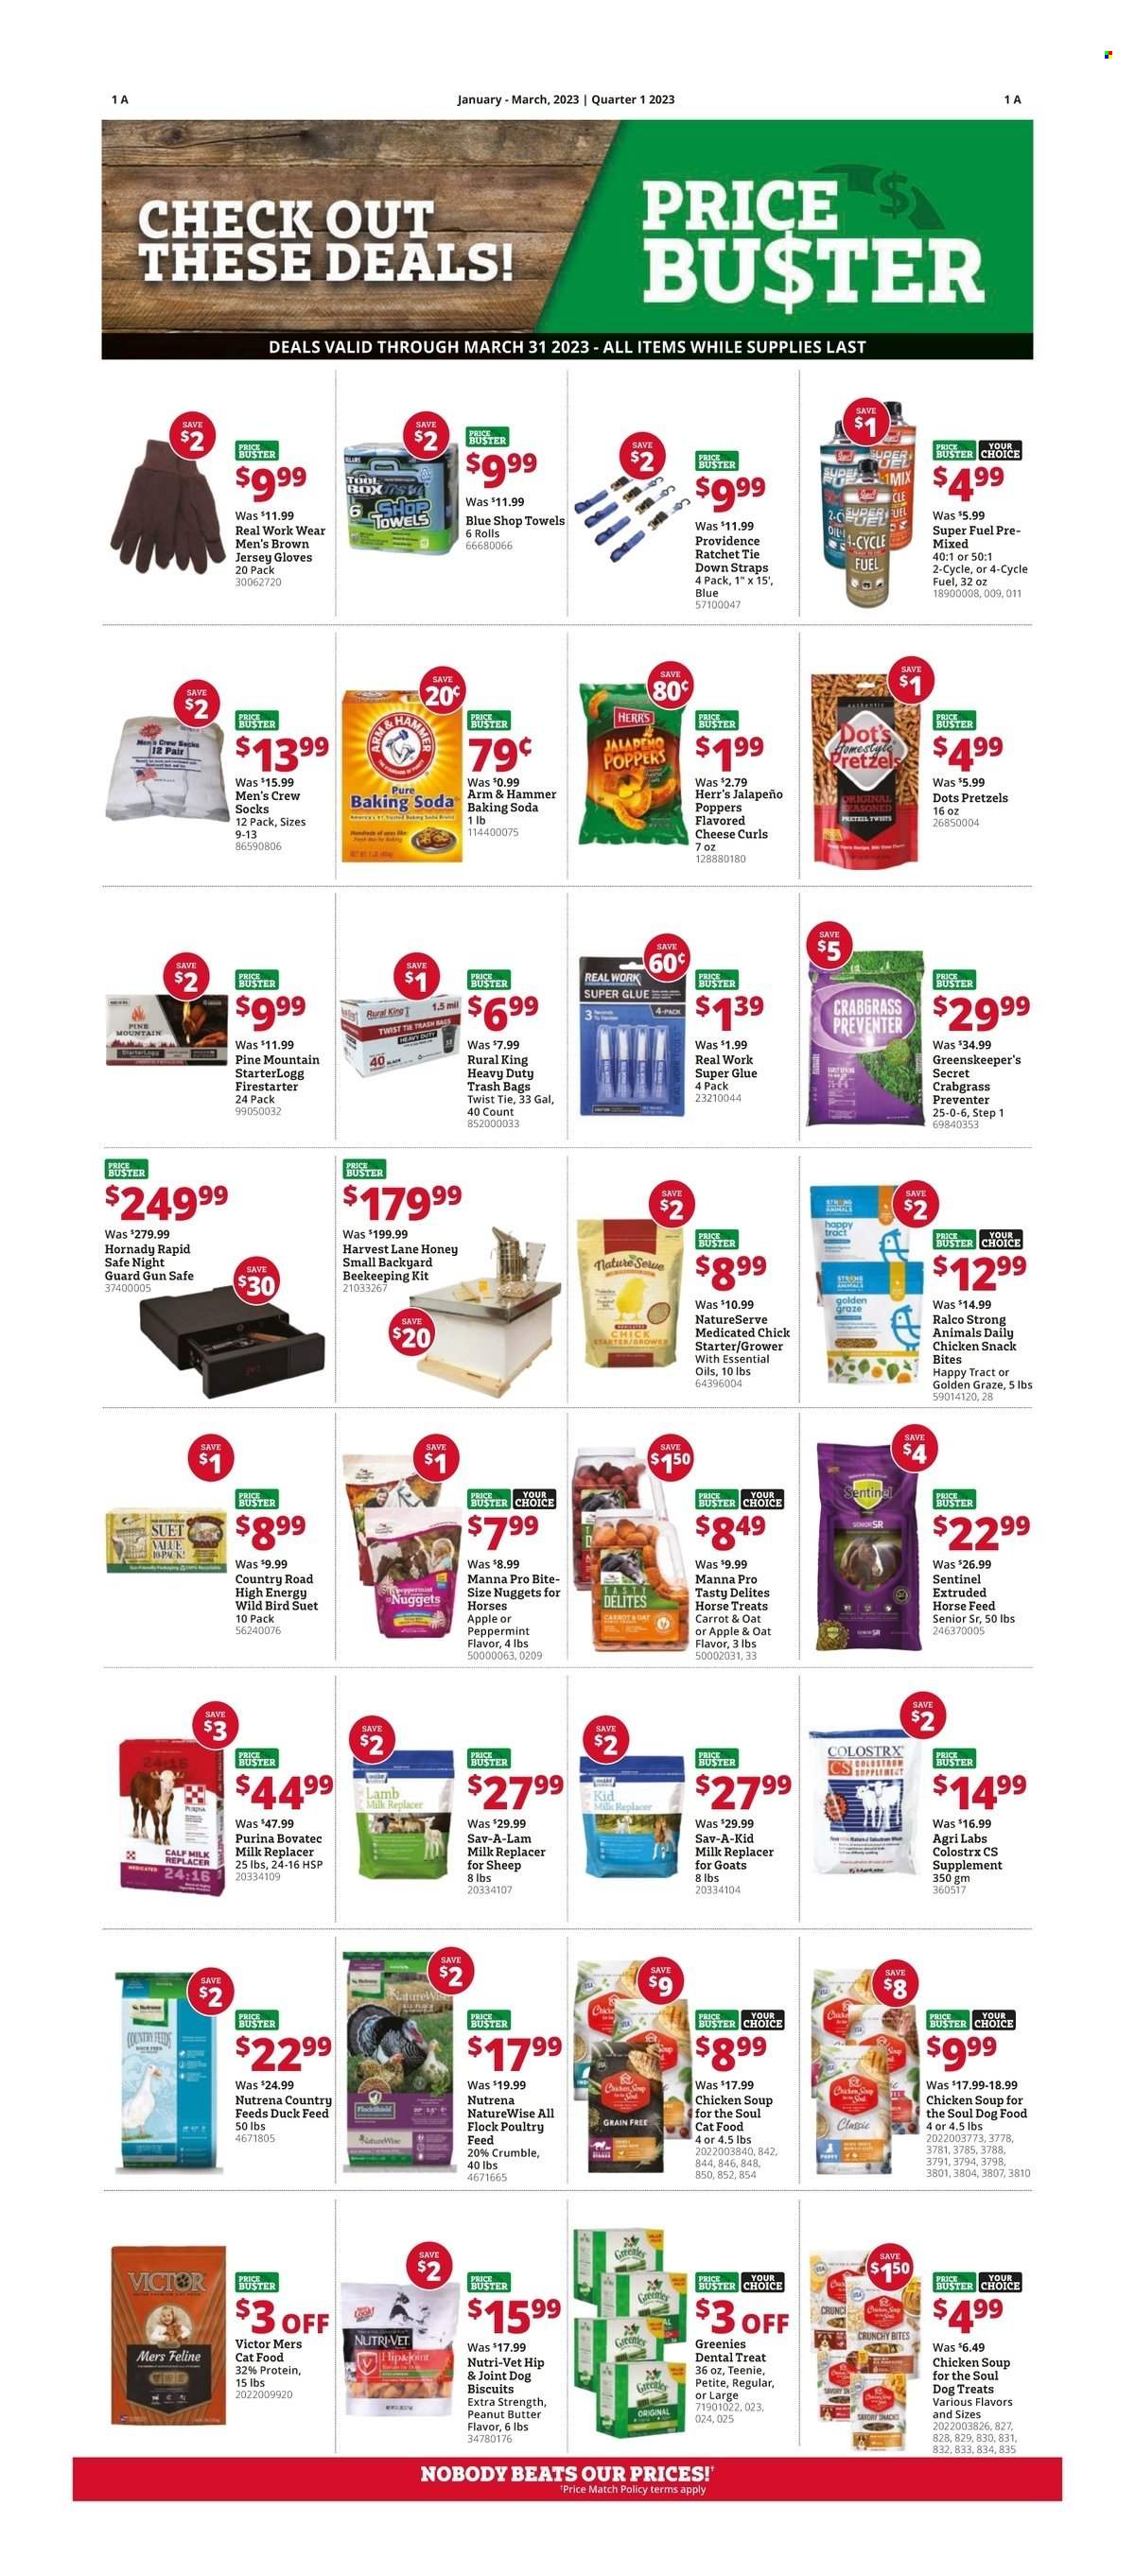 thumbnail - Rural King Flyer - 02/03/2023 - 03/31/2023 - Sales products - soup, nuggets, pretzels, snack, ARM & HAMMER, bicarbonate of soda, jalapeño, honey, peanut butter, Graze, bag, trash bags, gloves, essential oils, towel, animal food, Greenies, animal treats, cat food, dog food, suet, Purina, dog biscuits, Victor, duck feed, Chicken Soup for the Soul, Colostrx, Colostrum, Hama, jersey, socks, gun safe, crabgrass preventer, starter. Page 1.